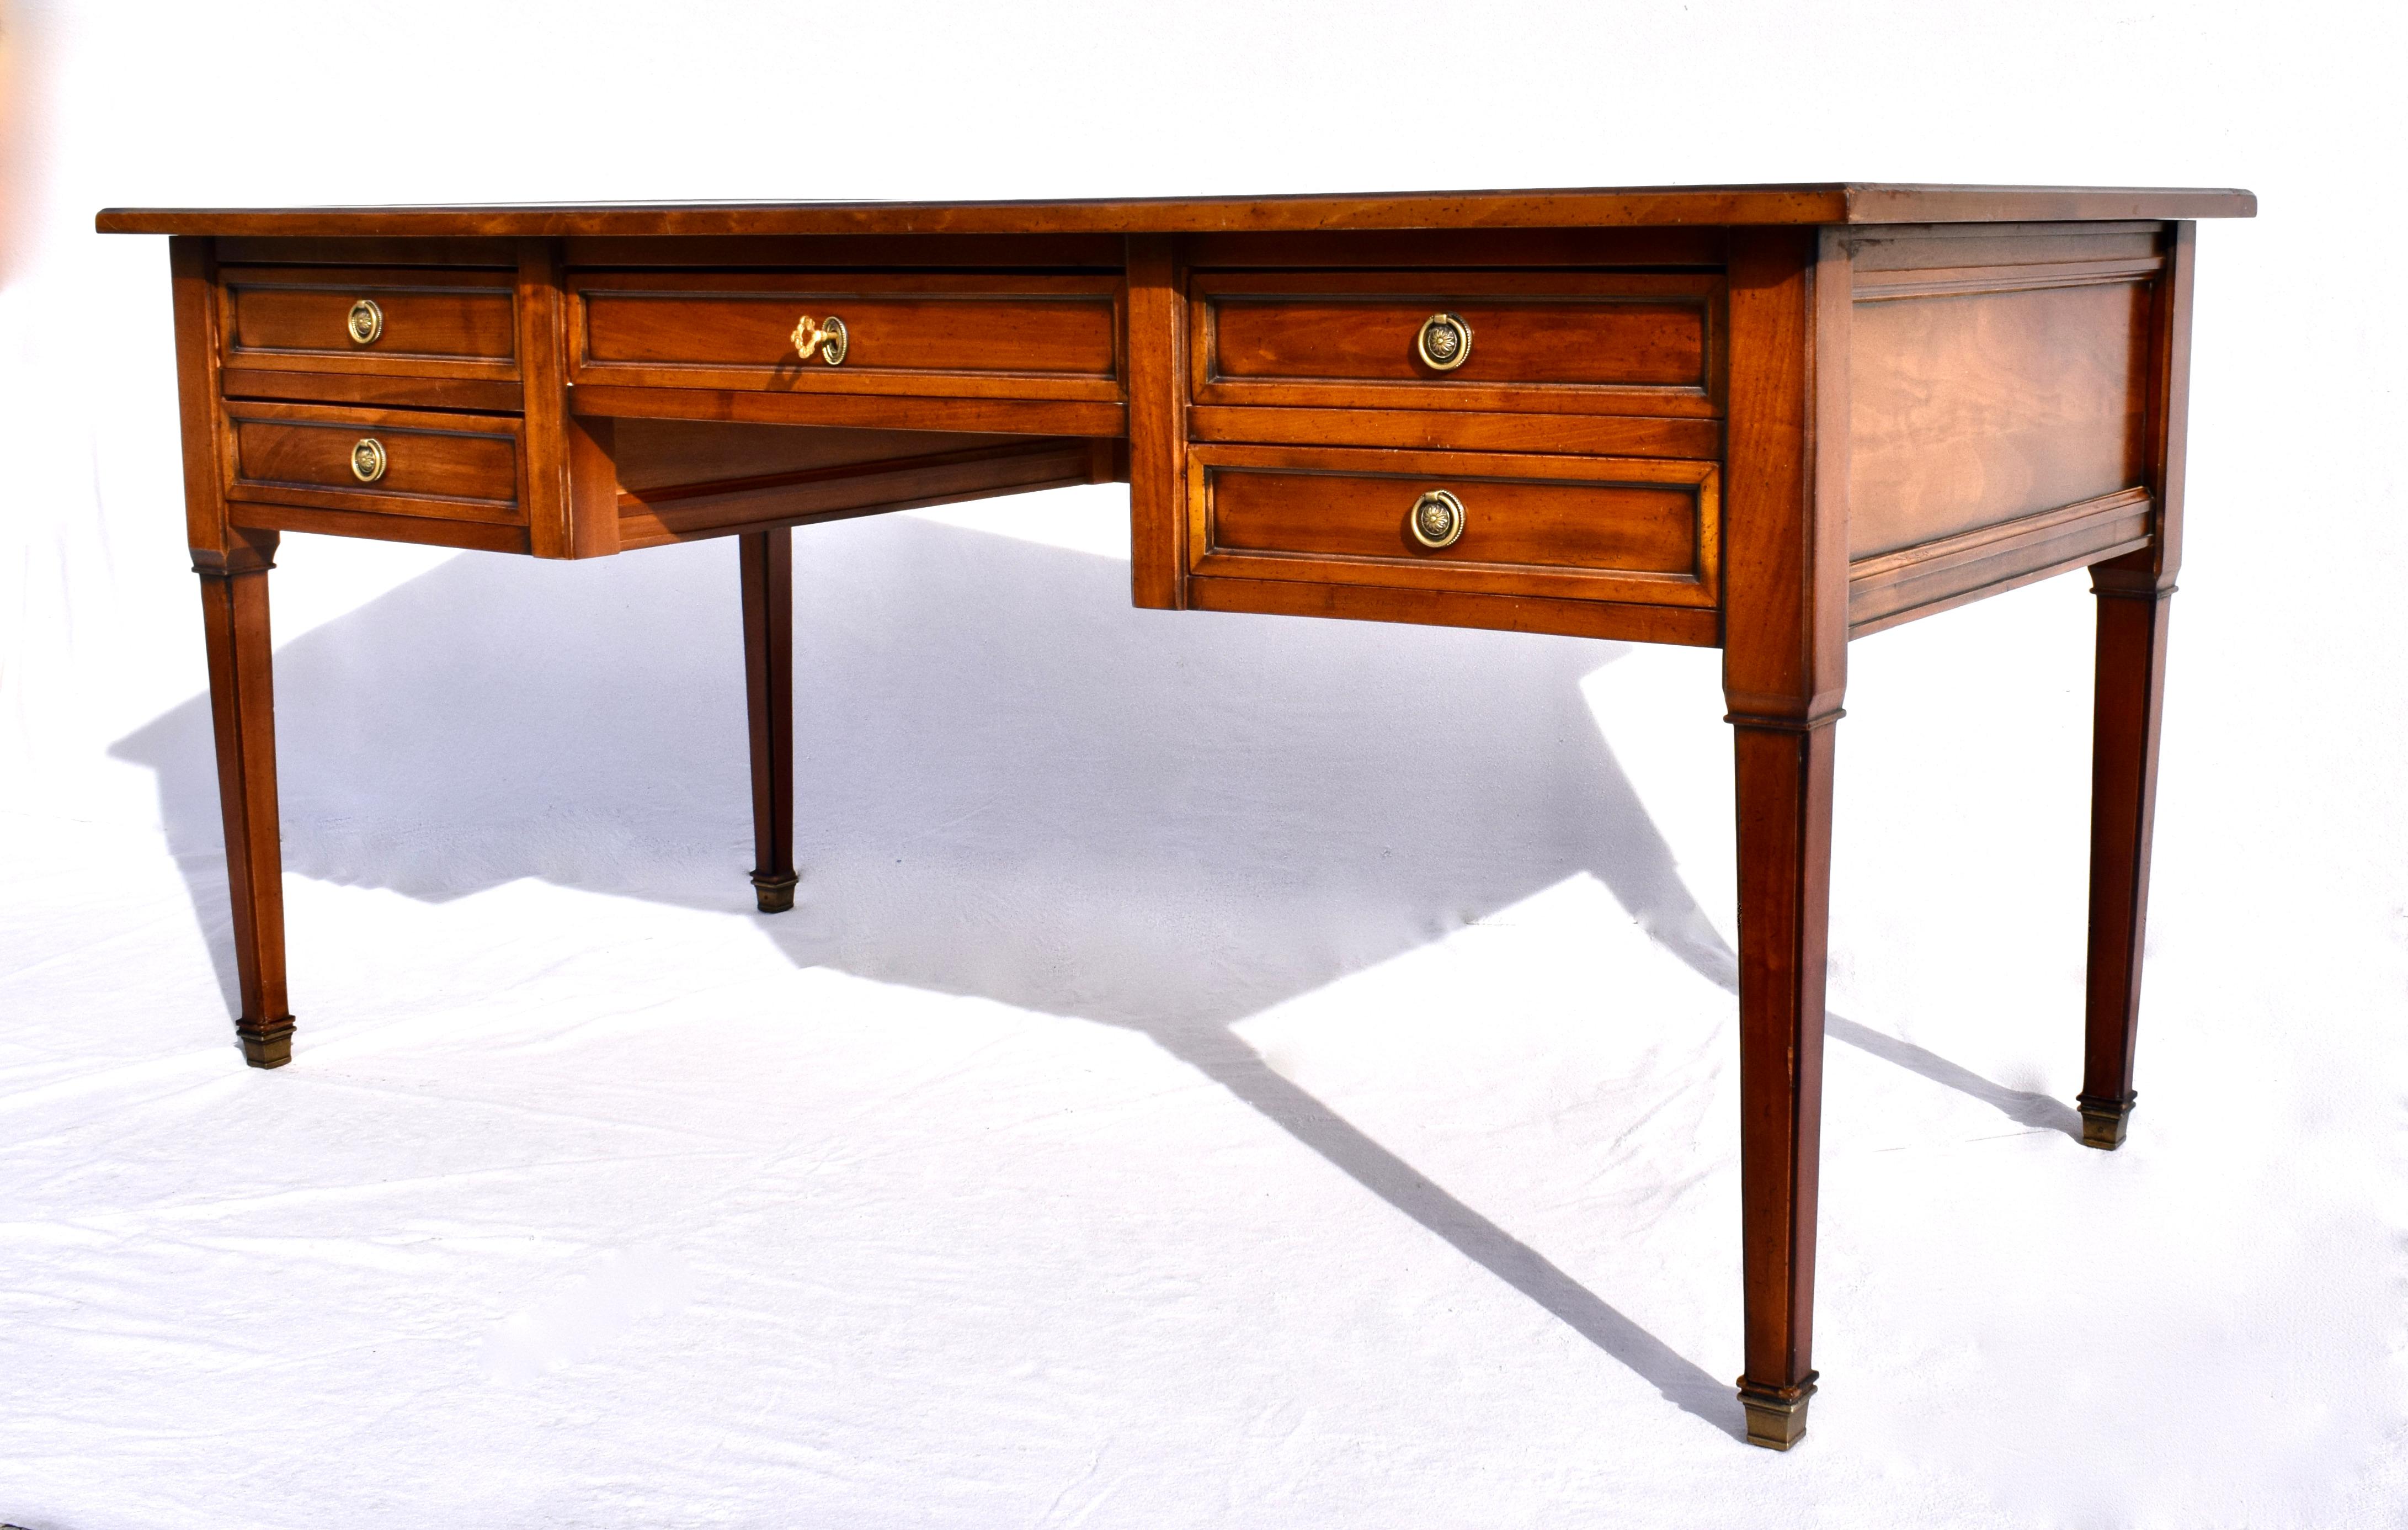 Directoire style desk hand-crafted of solid Mahogany or cherry-wood features five dovetailed drawers with working lock & decorative key. Finished on all sides with striking green tooled leather top of classic lines suitable for open floor plan